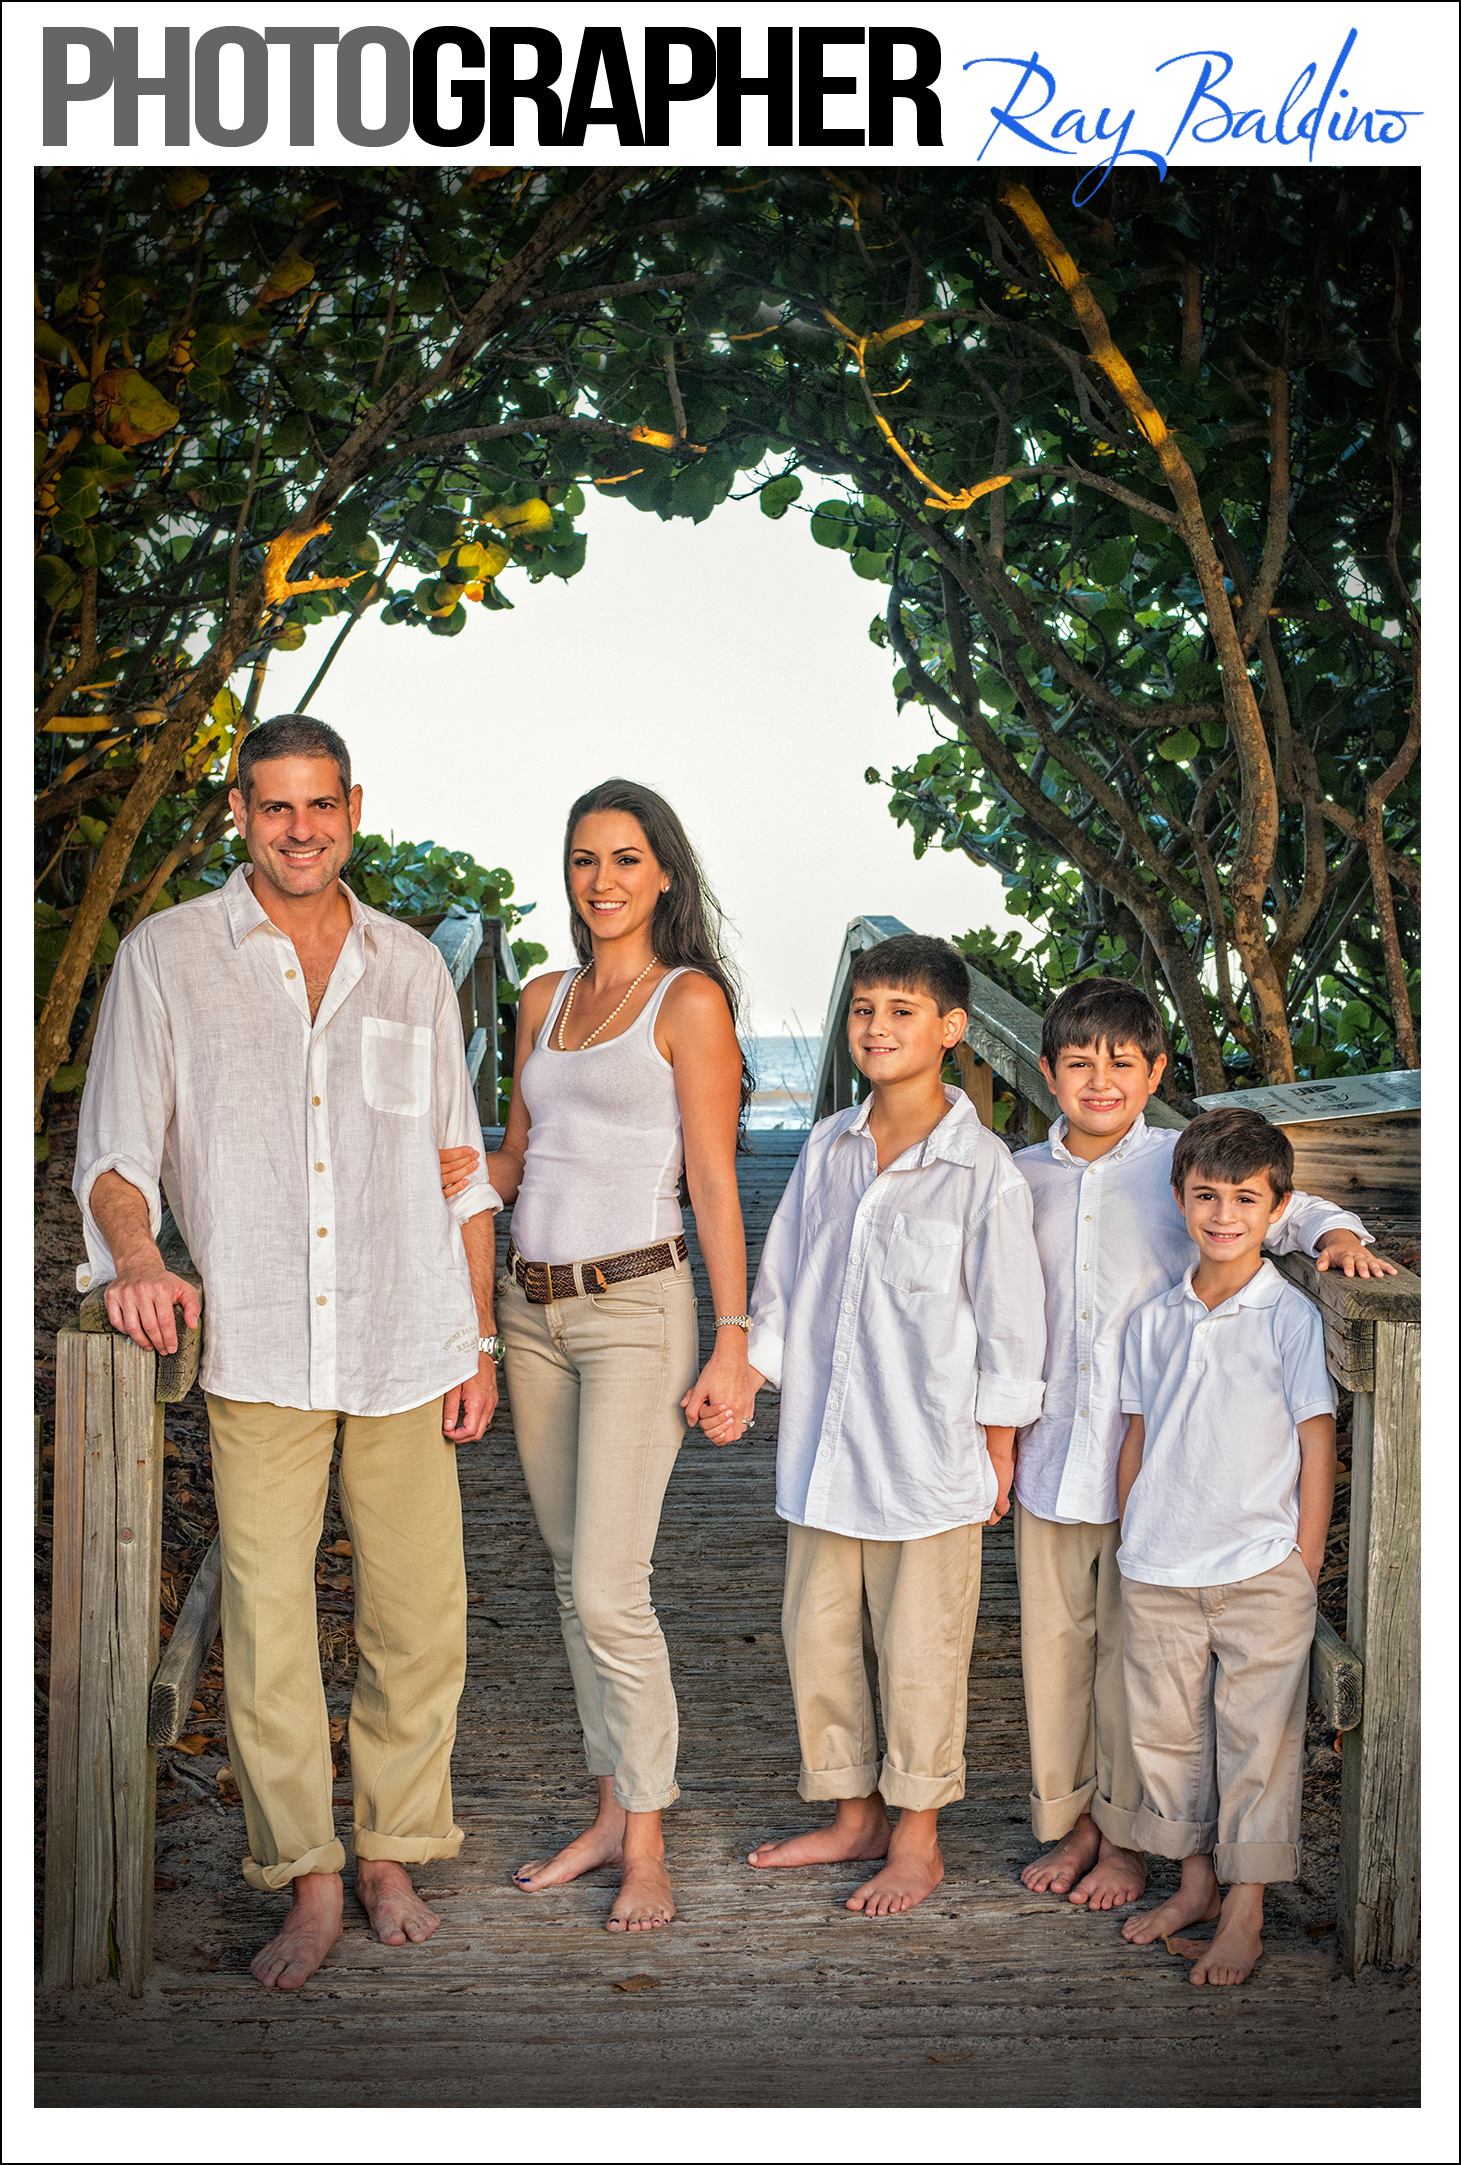 family-beach-photography-by-ray-baldino-in-cocoa-beach-florida-this-image-is-a-picture-of-a-family-with-their-children-standing-in-front-of-the-entrance-to-the-beach